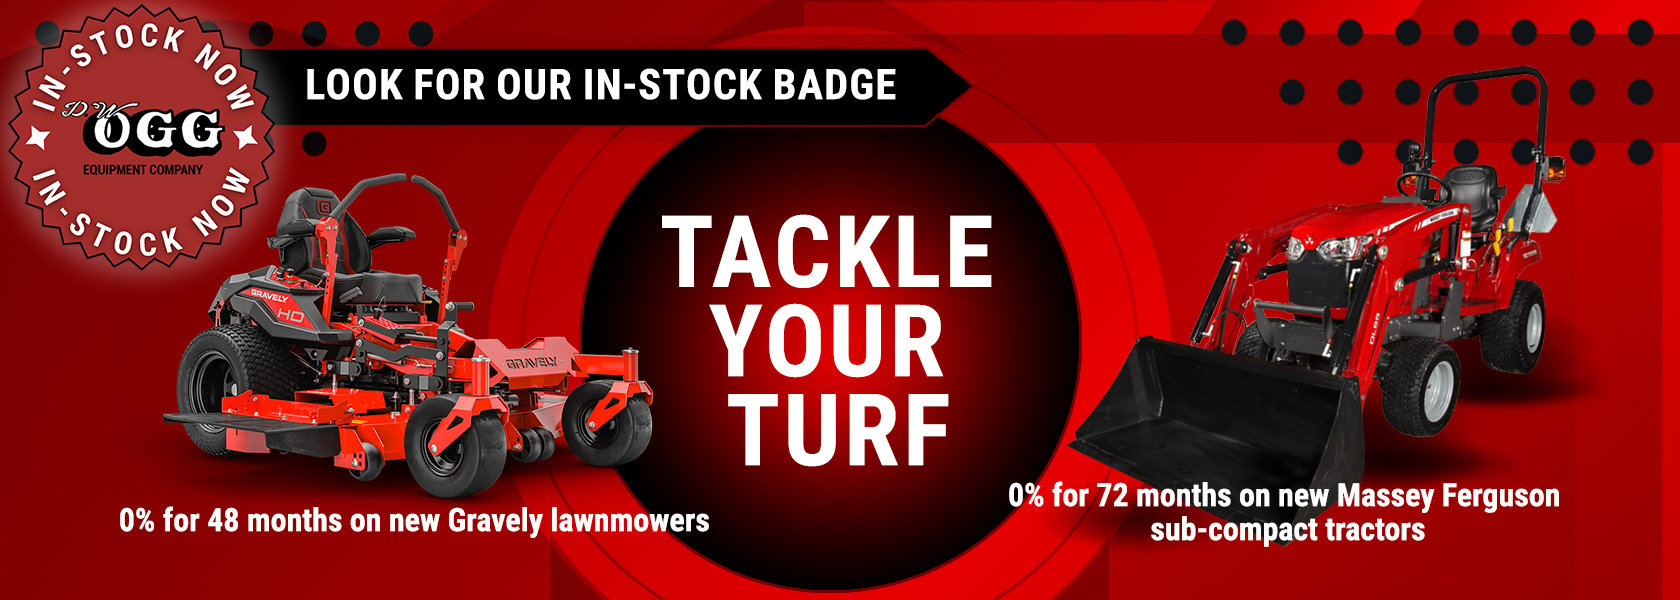 dwogg_tackle_your_turf_gravely-massey-header_1680x600_offer